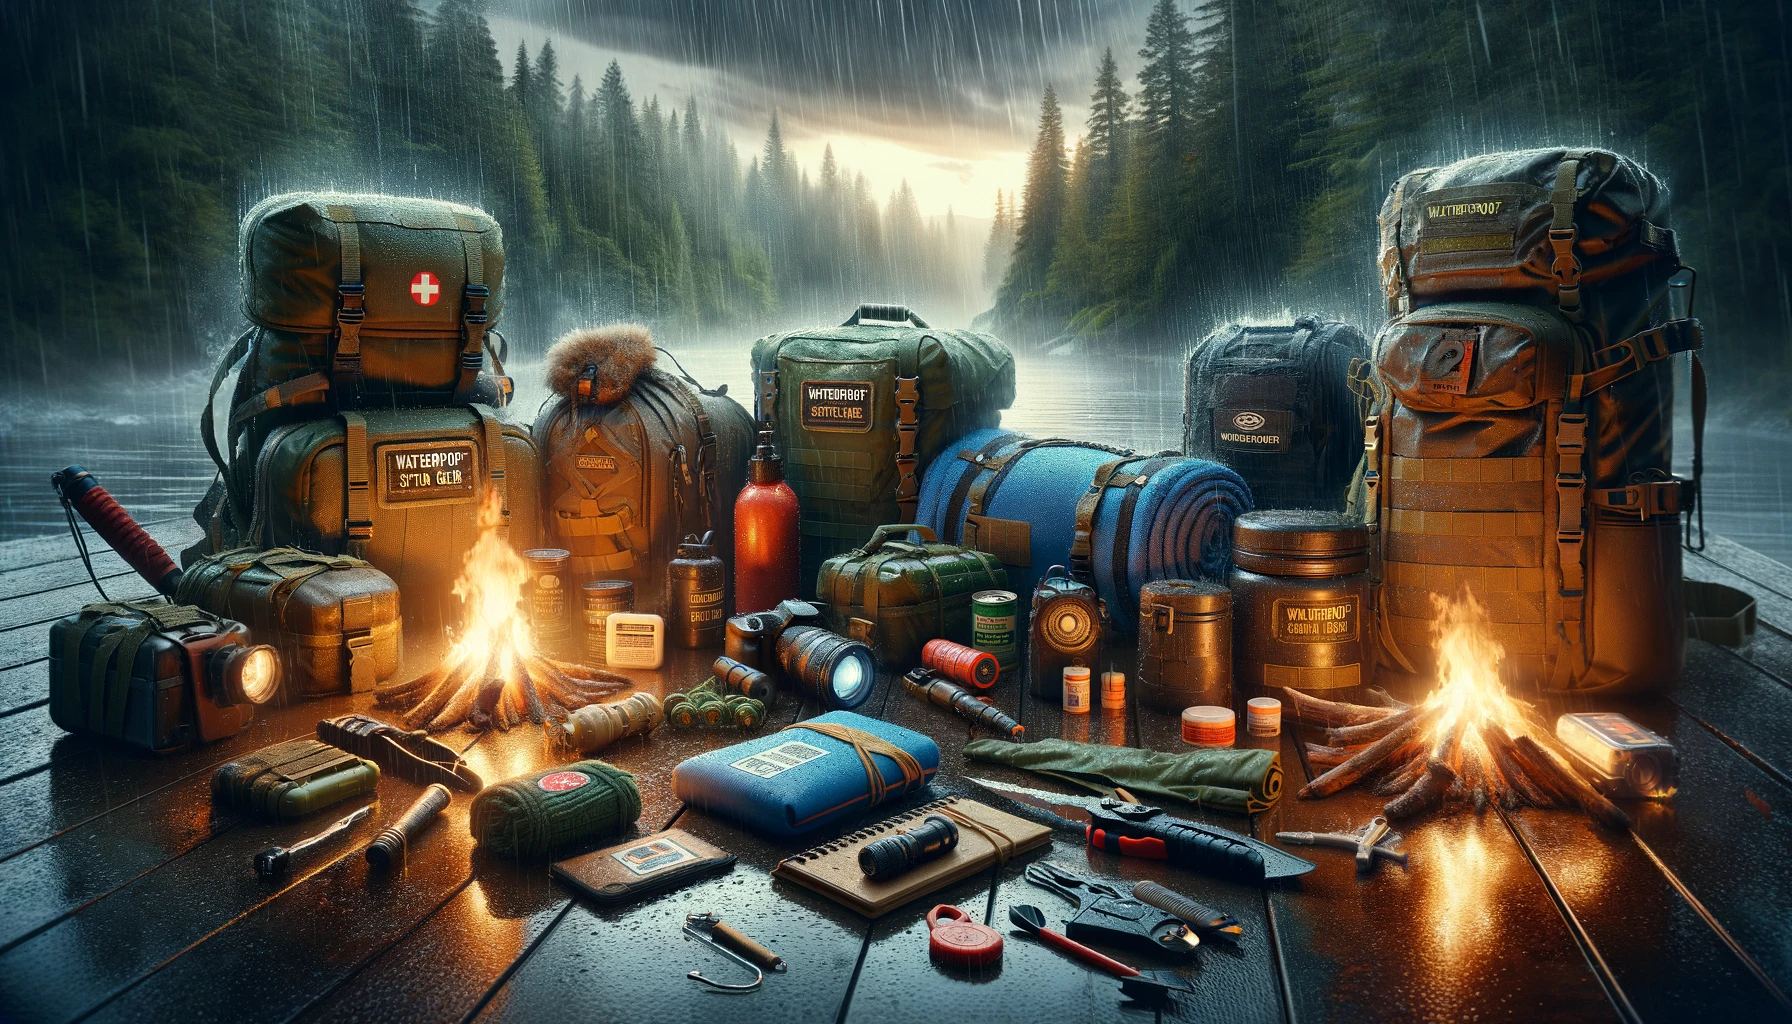 A dynamic and realistic depiction of advanced waterproof survival gear, including waterproof bags, containers, emergency blankets, all-weather notebooks, water-resistant flashlights, and fire-starting tools, laid out or being used in a rain-drenched outdoor setting. The image emphasizes the importance of waterproofing in survival situations, appealing to preppers prepared for extreme conditions.